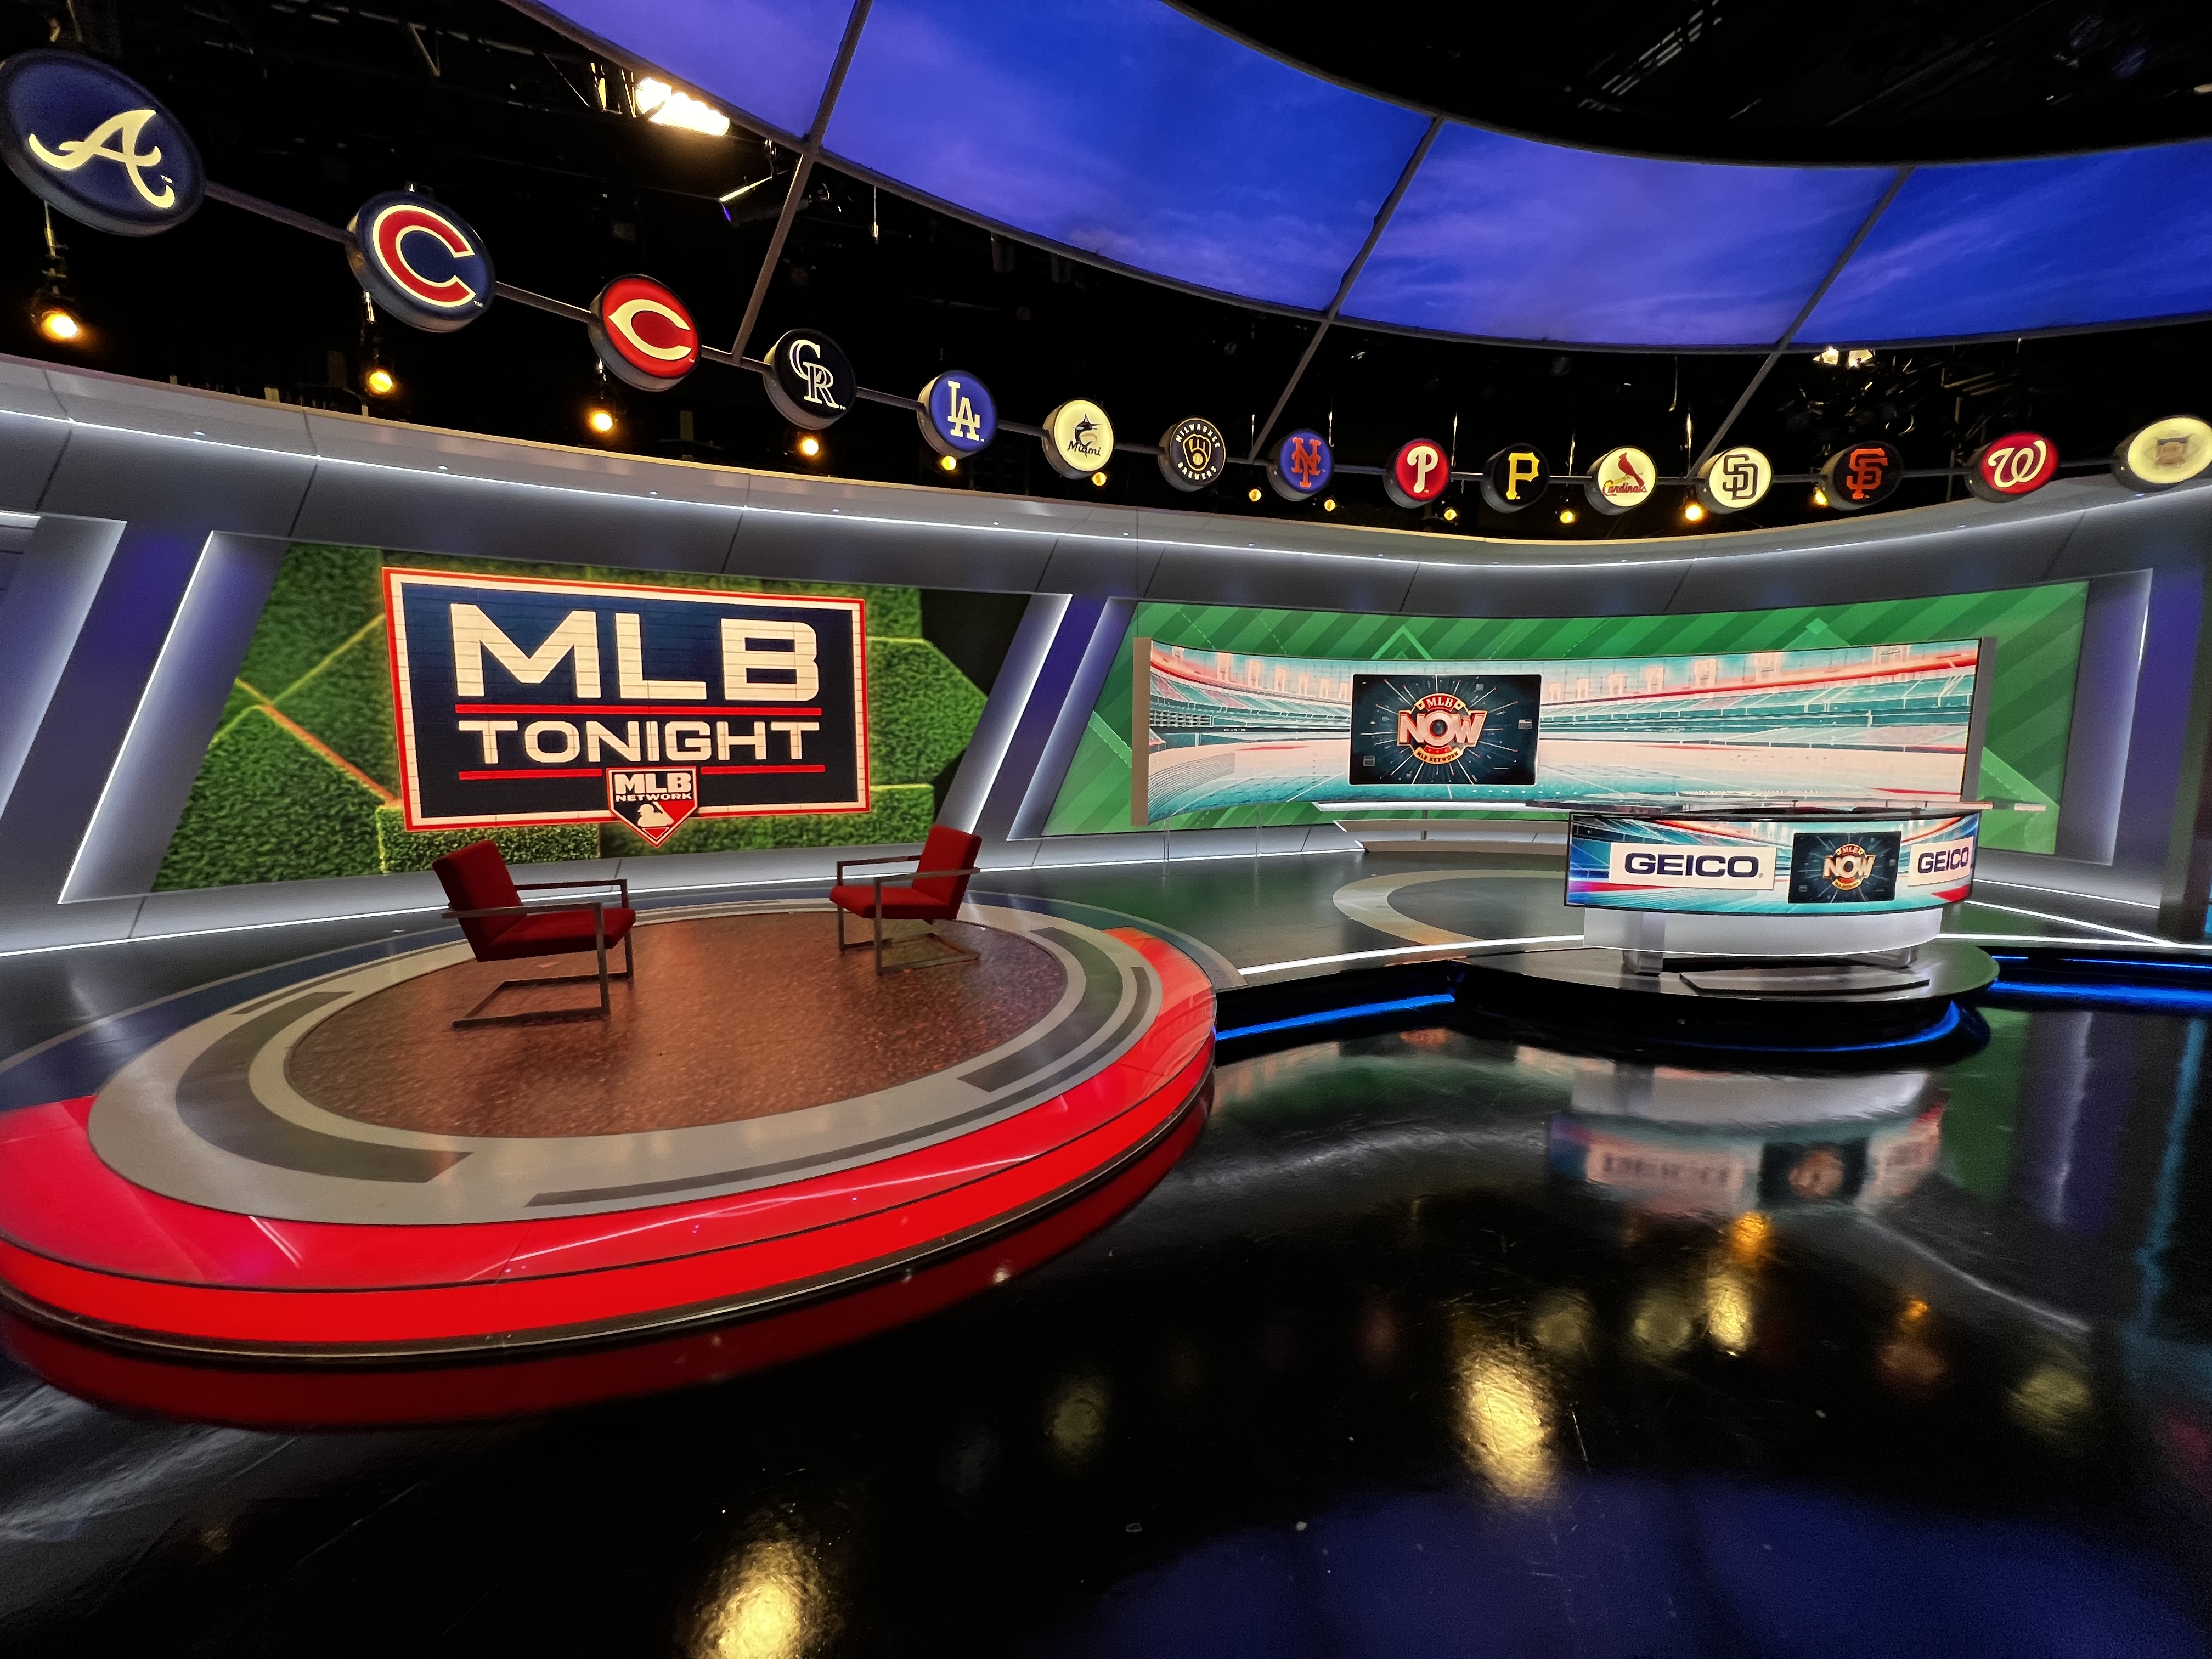 MLB Flagship Store  Digital Signage Platform seen on TV daily by